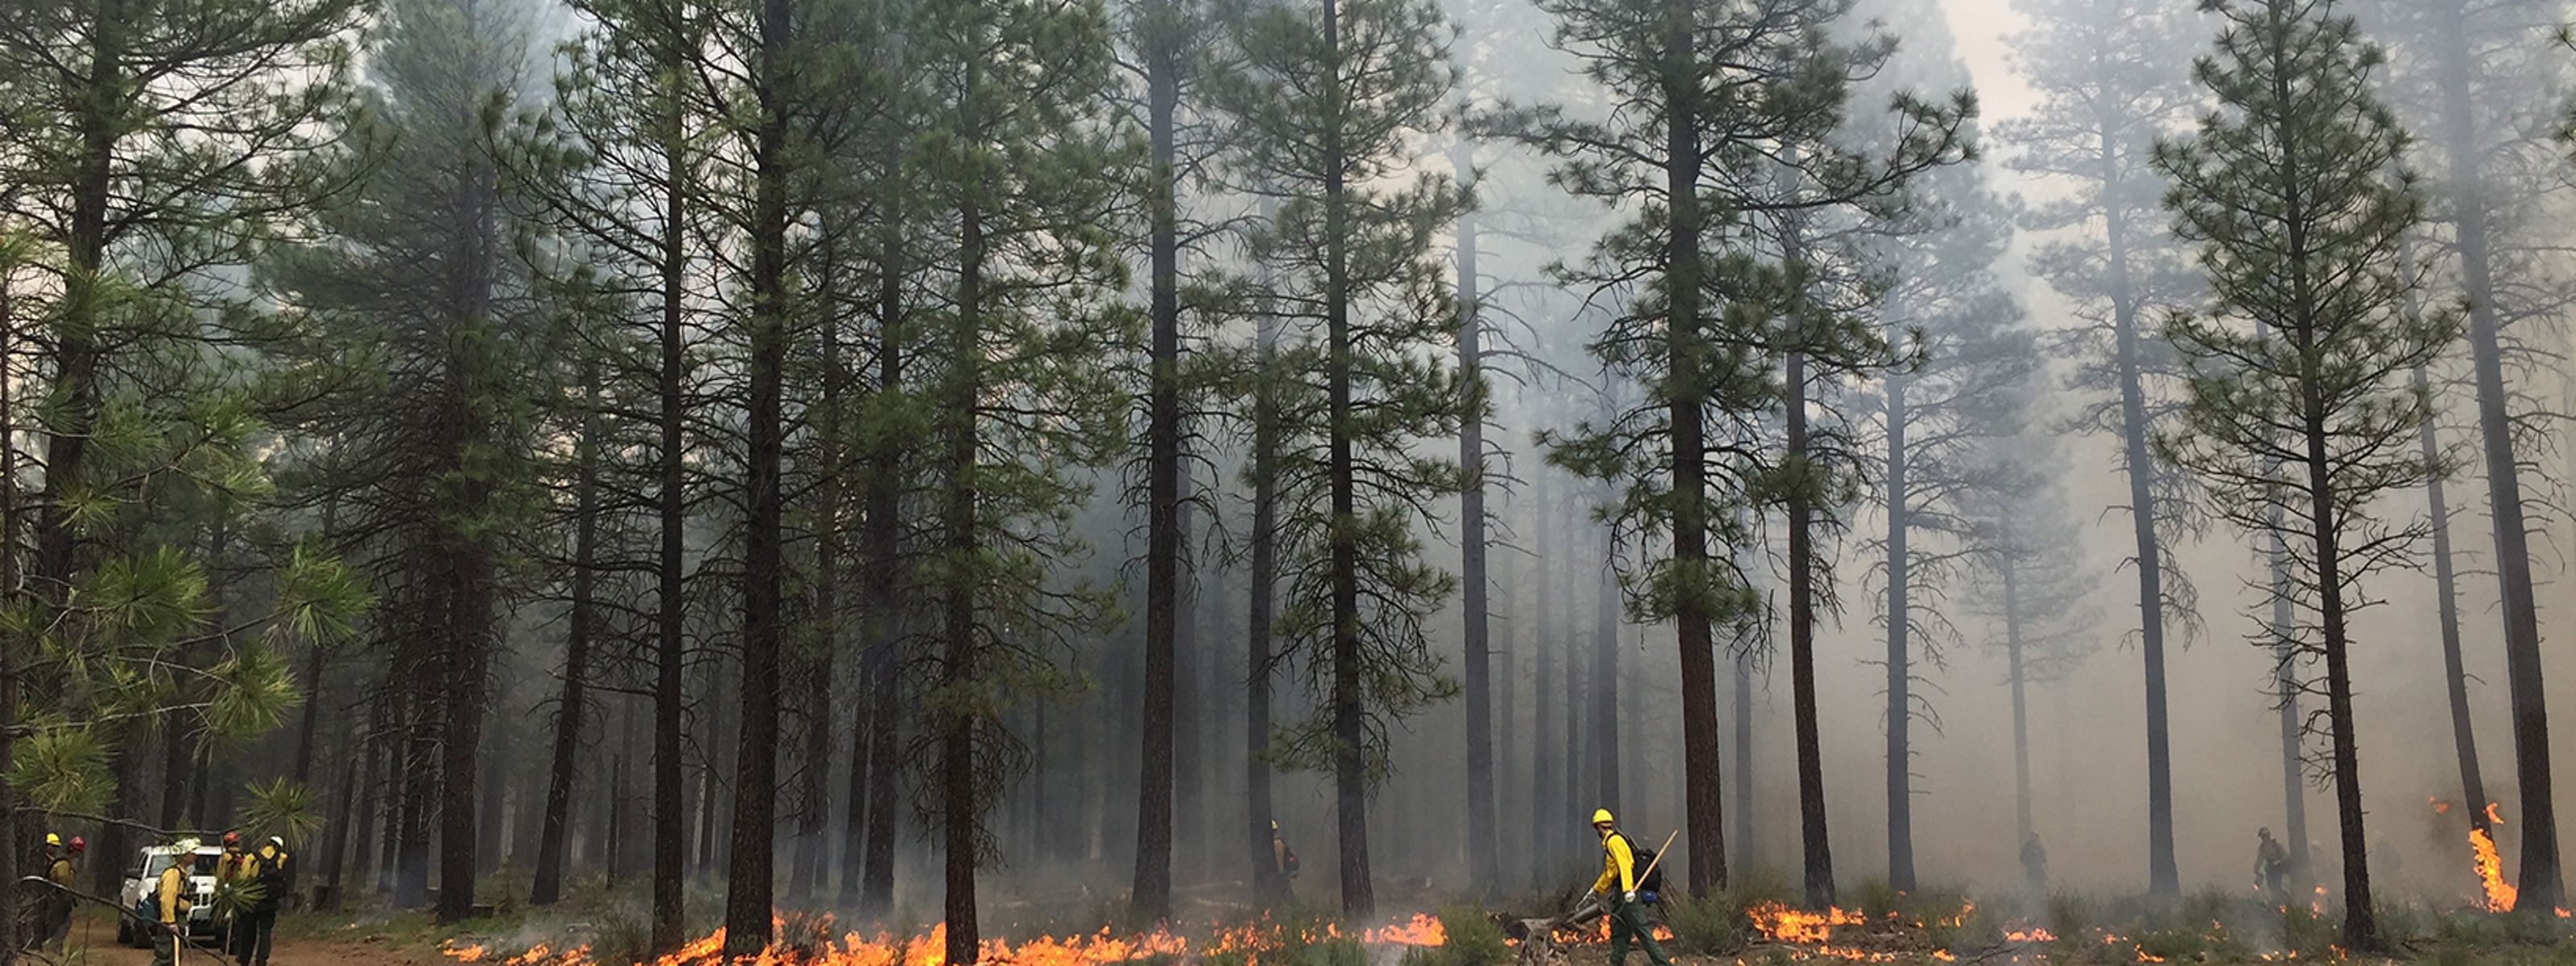 Planned fires pave the way for safer communities and fire-adapted ecosystems restored to a healthier, more resilient condition.